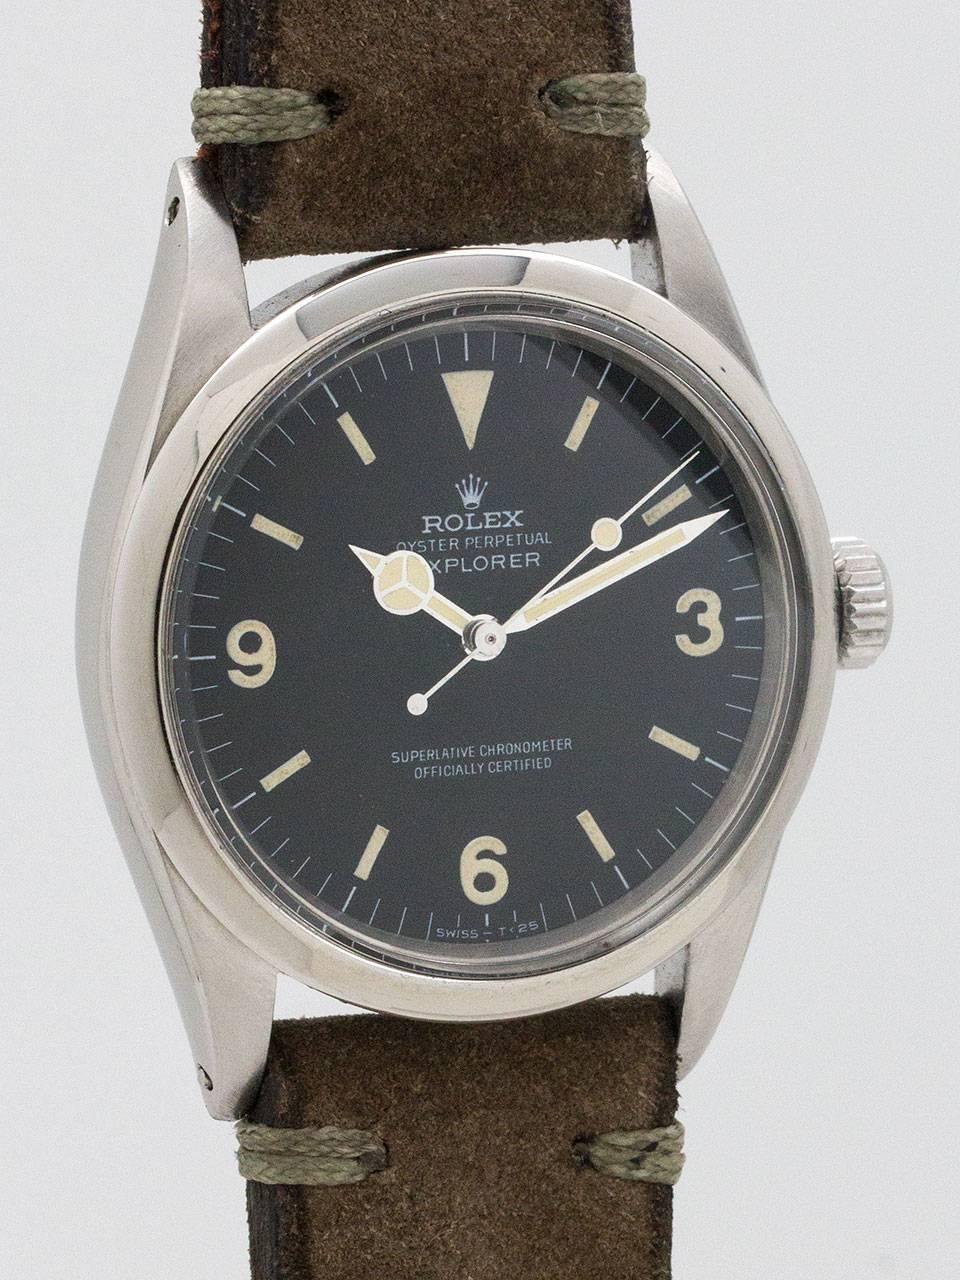 Rolex Stainless Steel Explorer 1 Wristwatch ref 1016 serial number 2.5 million circa 1969. 36mm diameter case with smooth bezel and acrylic crystal. Original matte black dial with ivory color original luminous indexes and closely matching luminous